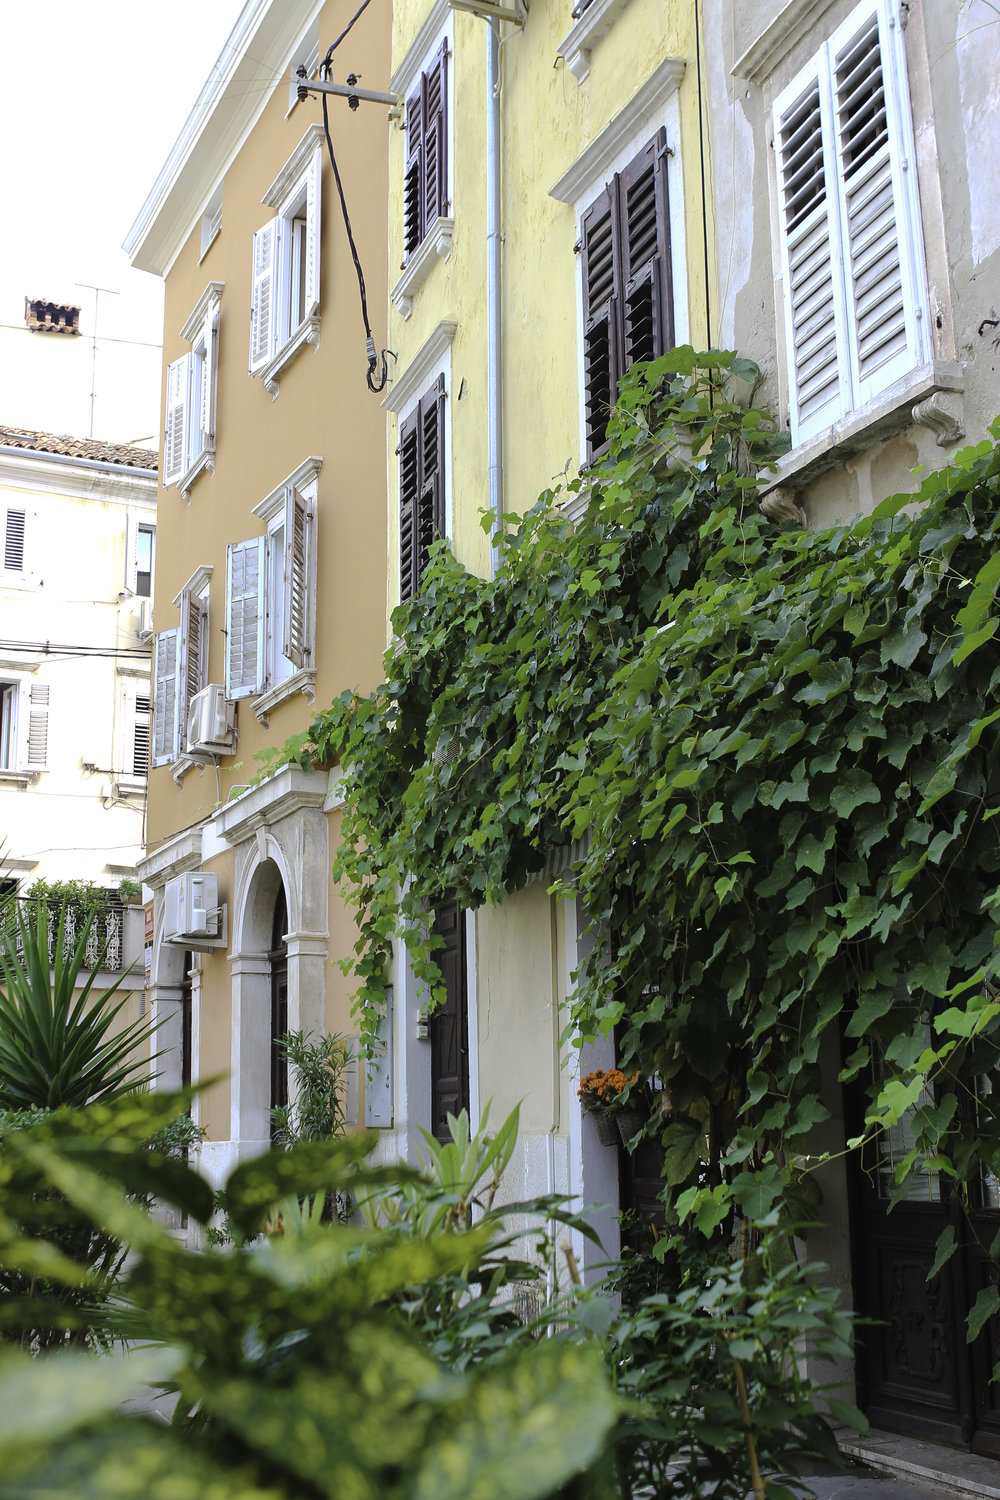 Amidst the narrow streets, lush plants hang from each window and doorway.